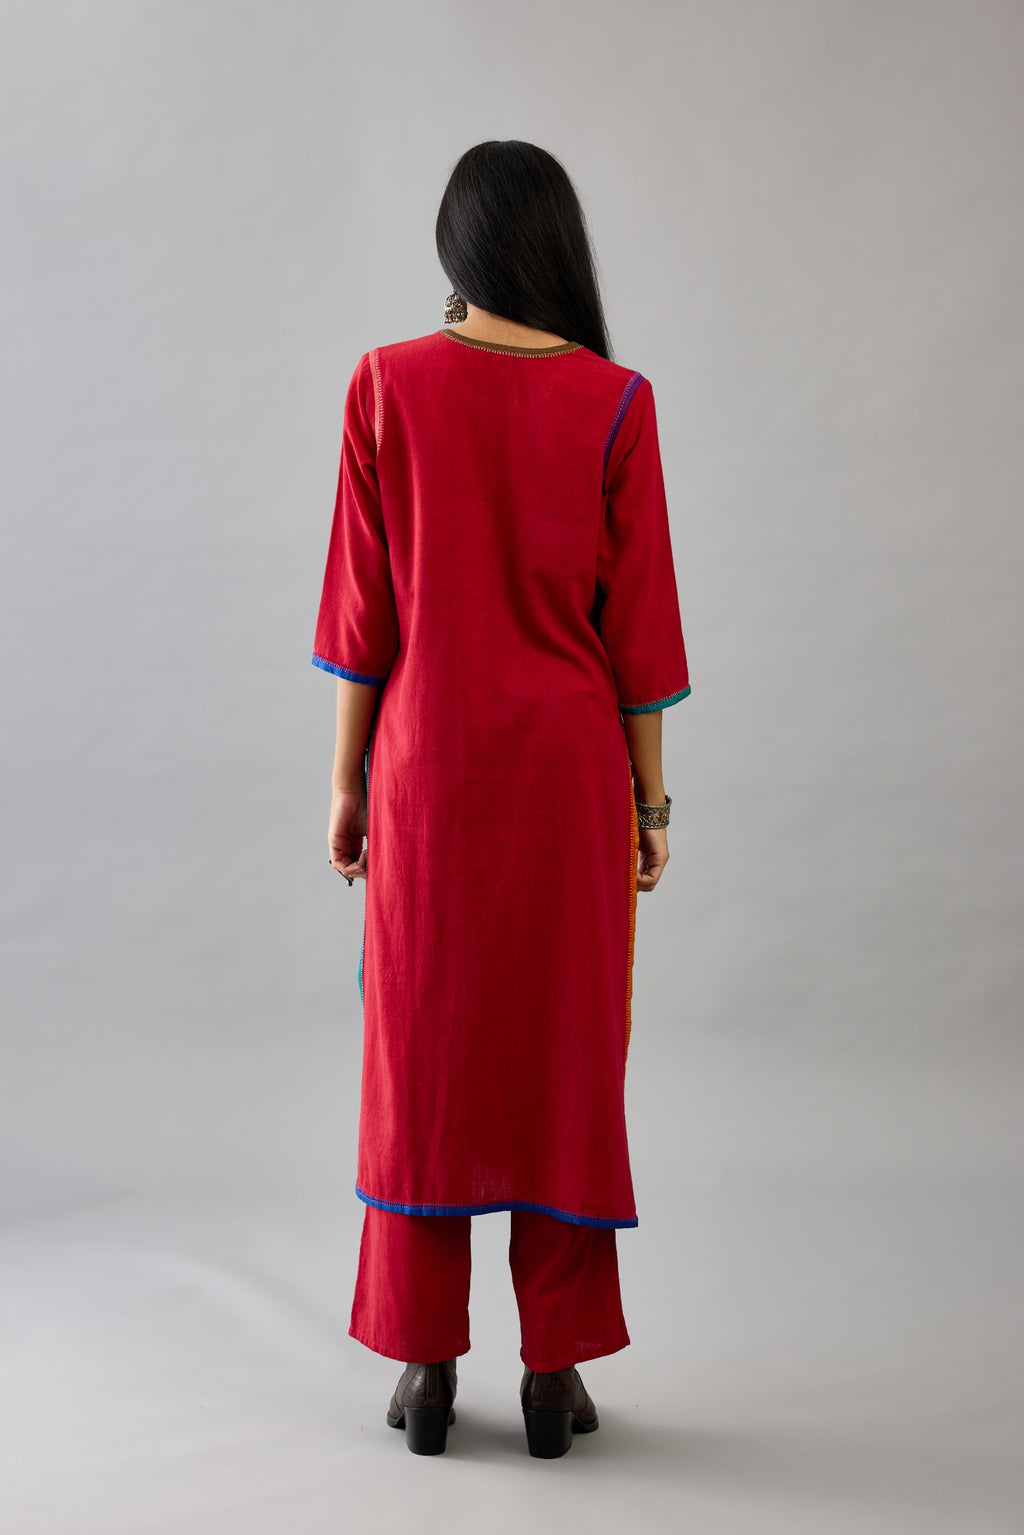 Red handloom cotton straight kurta set with slit neck, multi colored silk facings and embroidery detail.